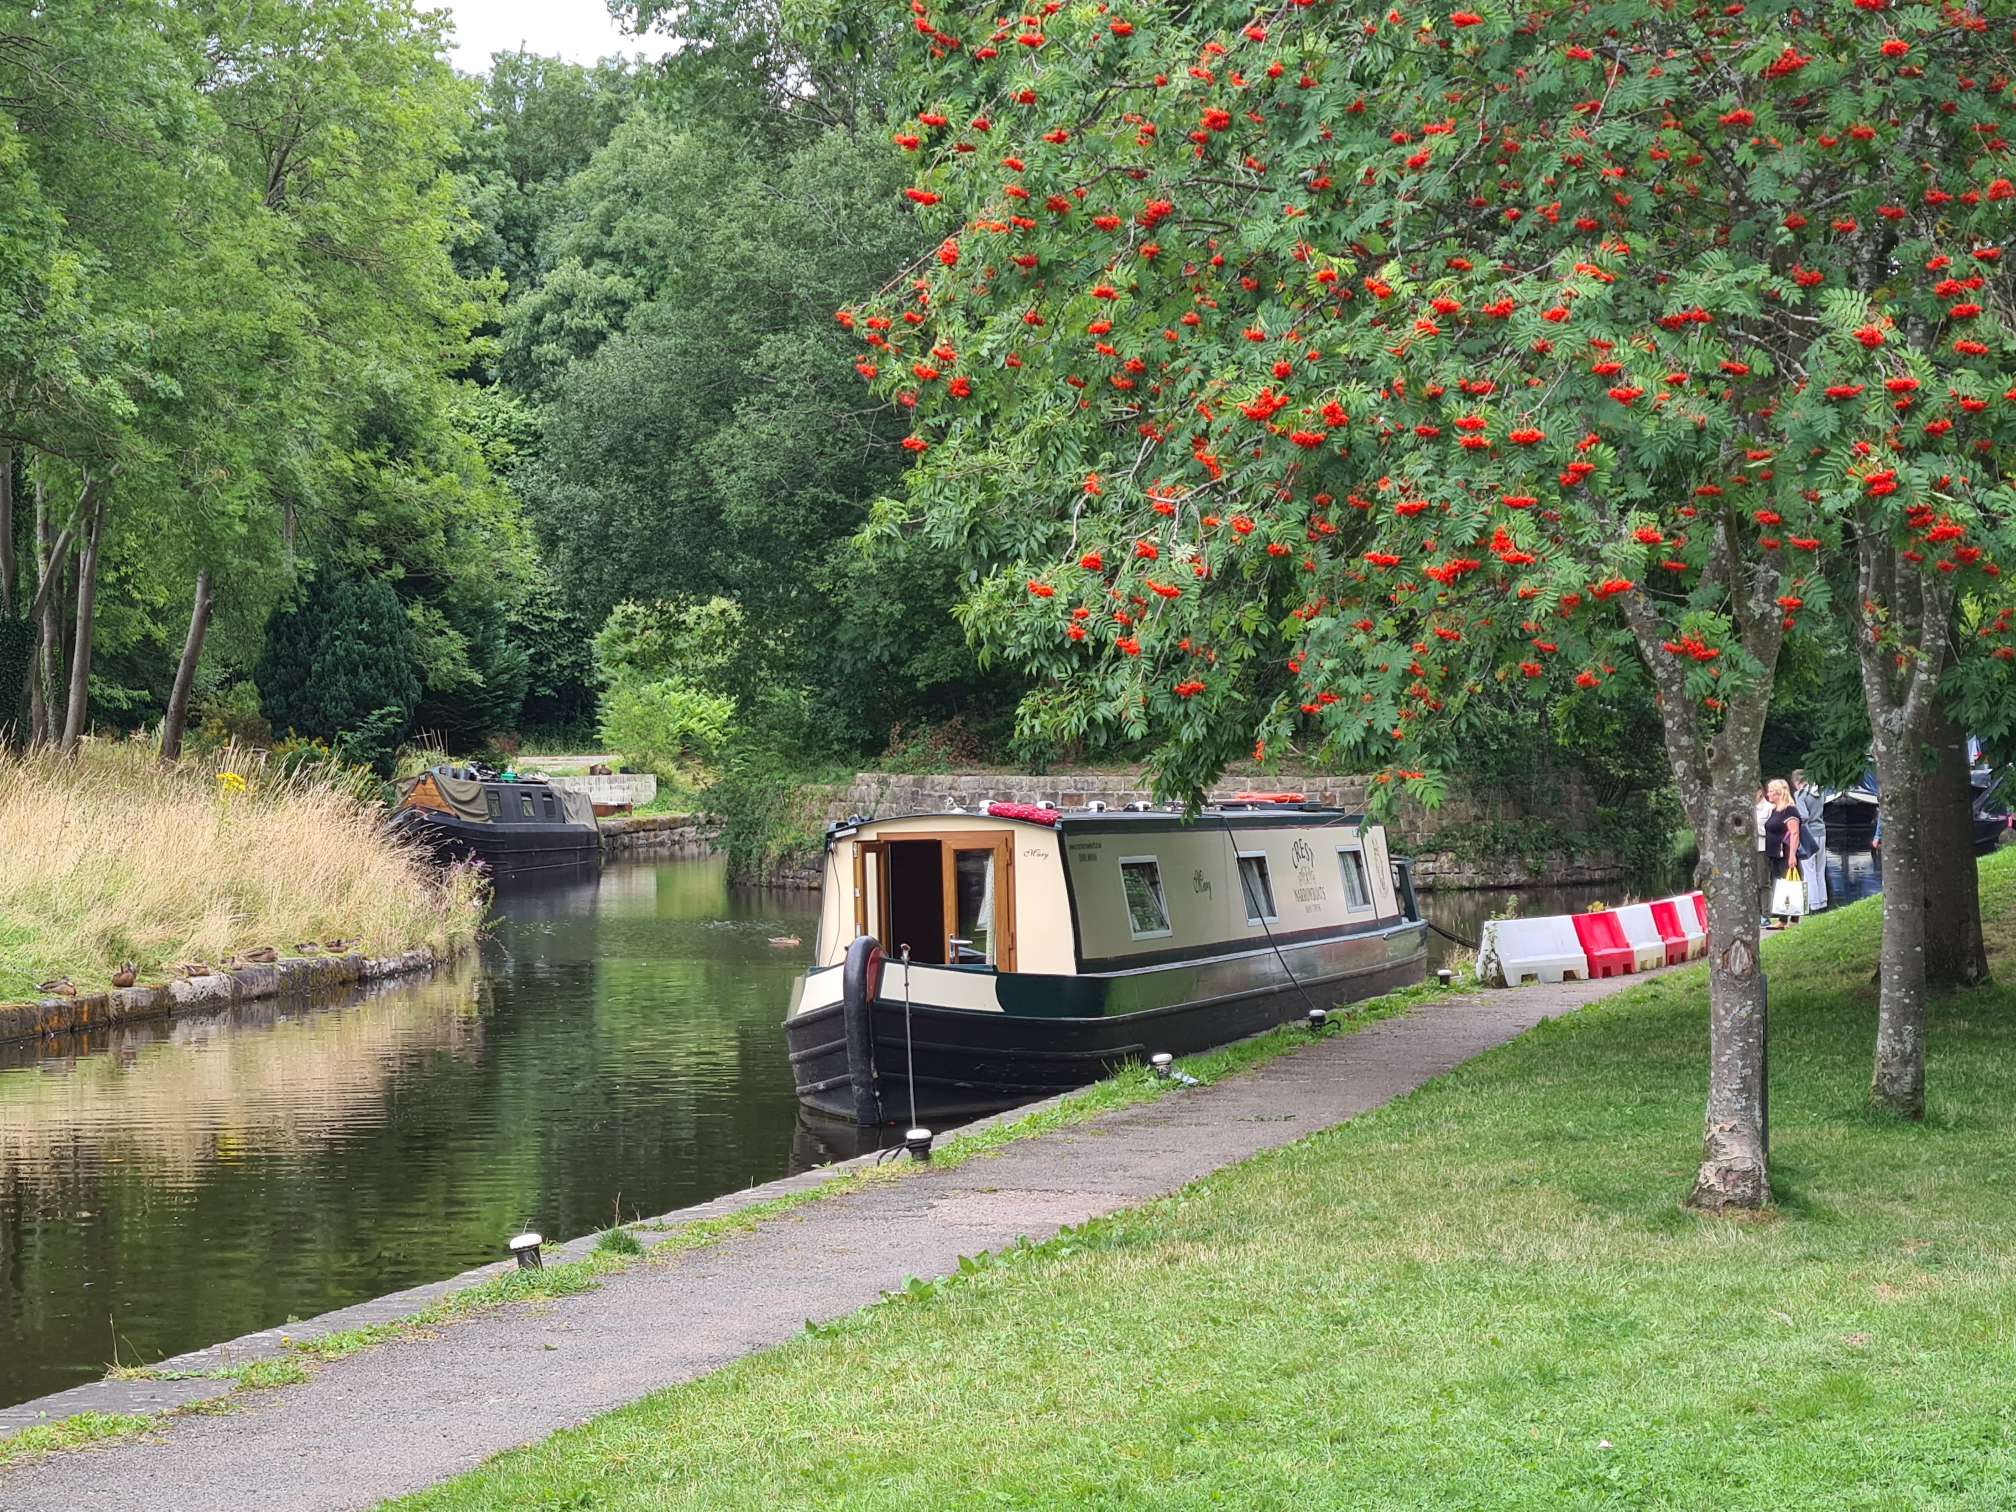 Boats parked on the Llangollen canal